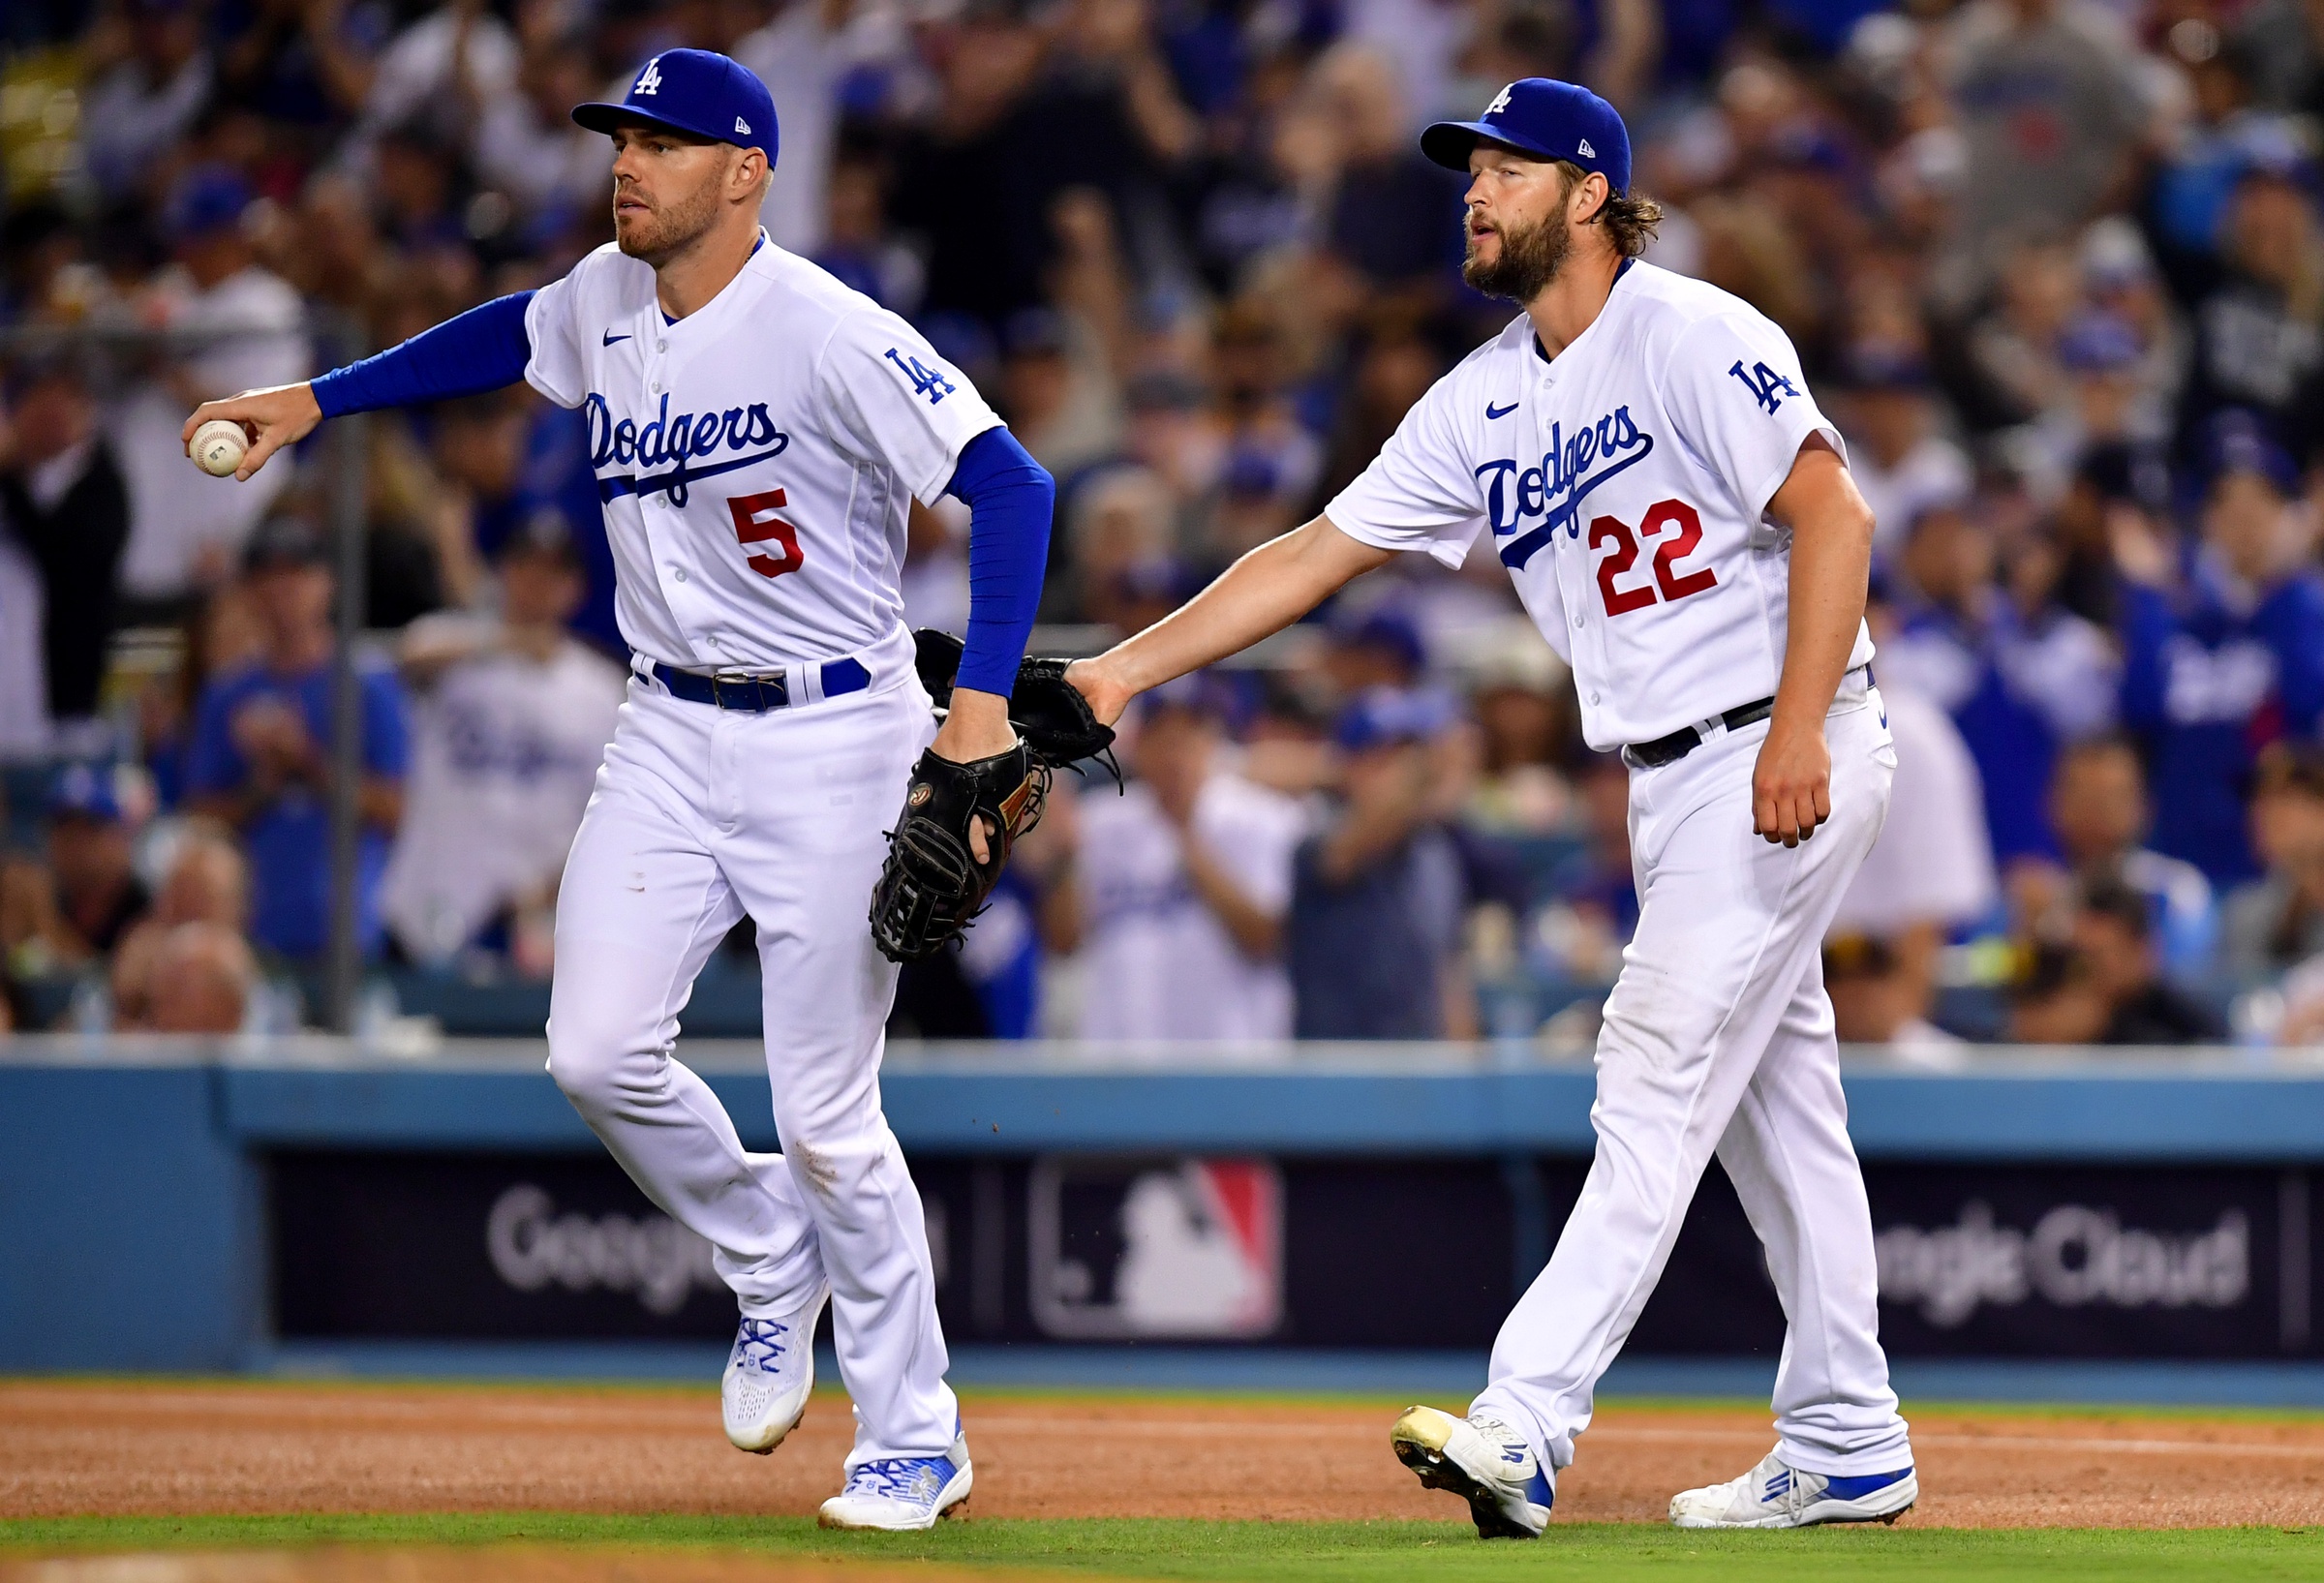 Staying in LA! Clayton Kershaw, Dodgers closing in on a 1-year